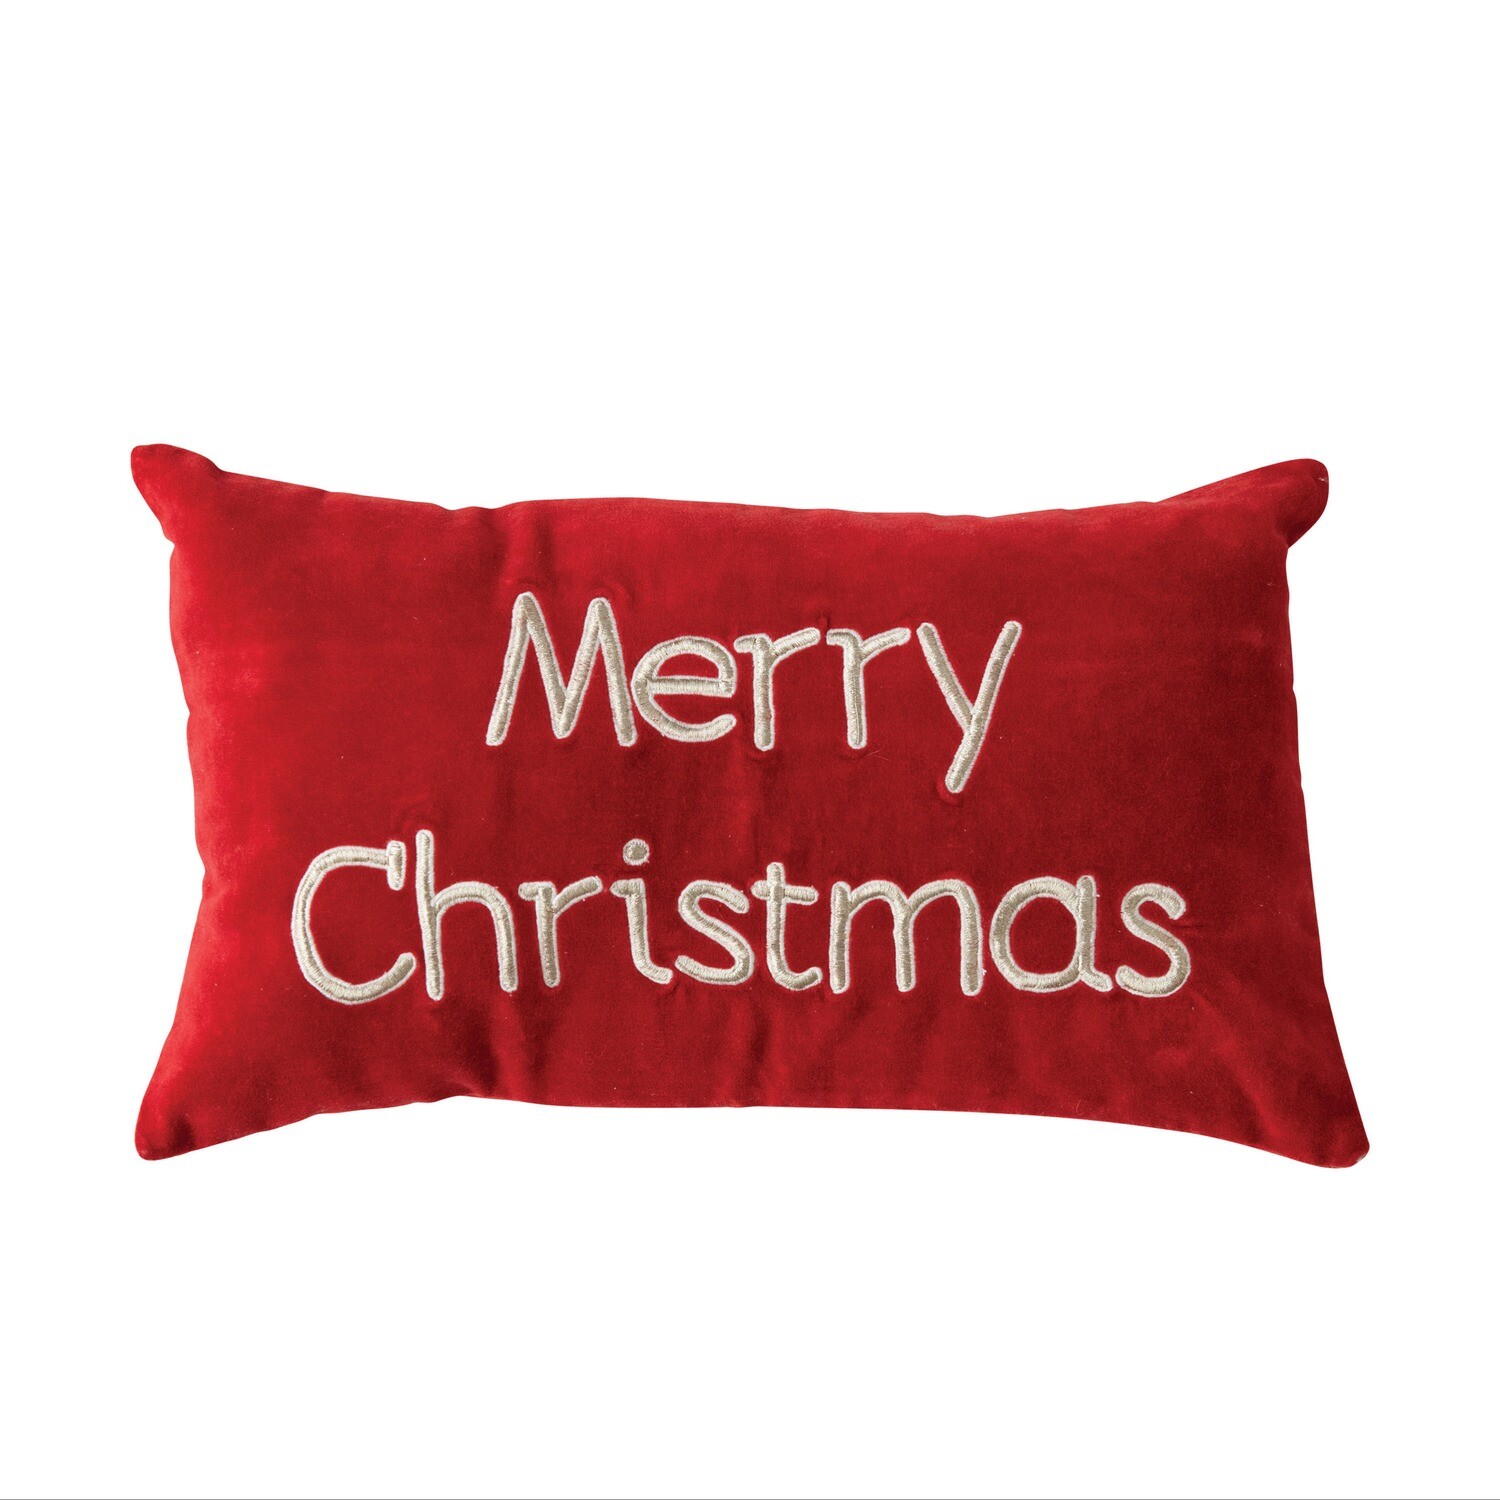 Merry Christmas Red Pillow